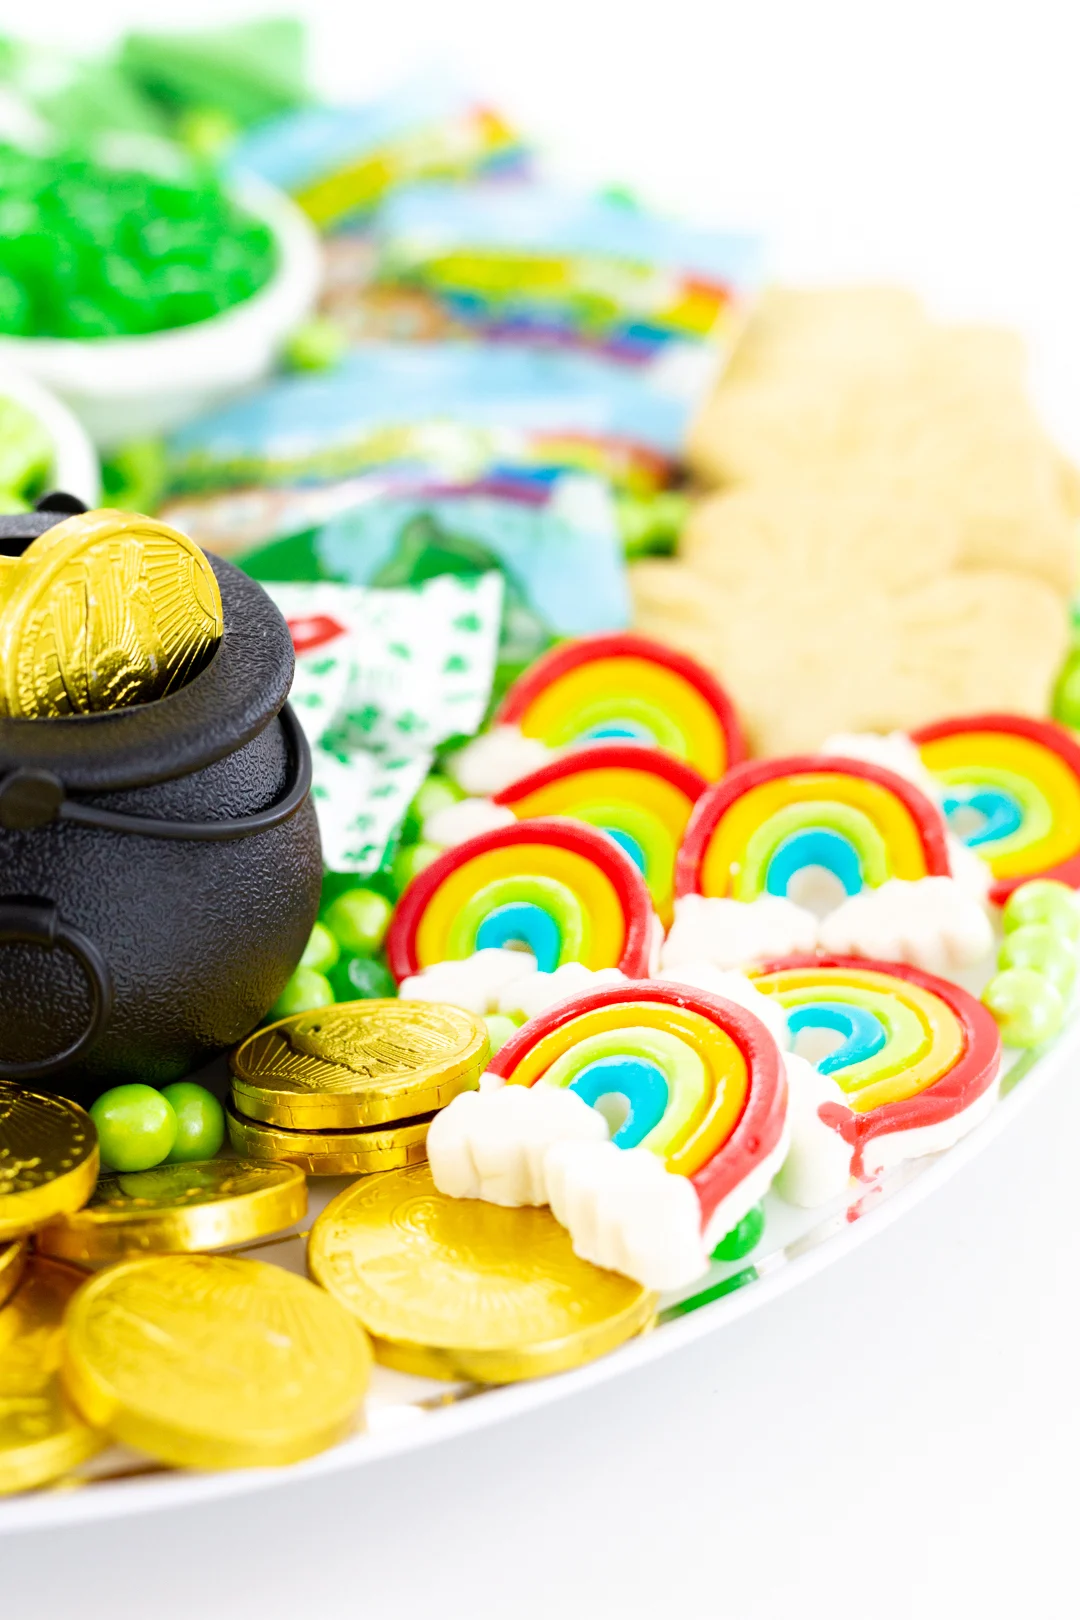 rainbow gummy candies and gold coins on a tray